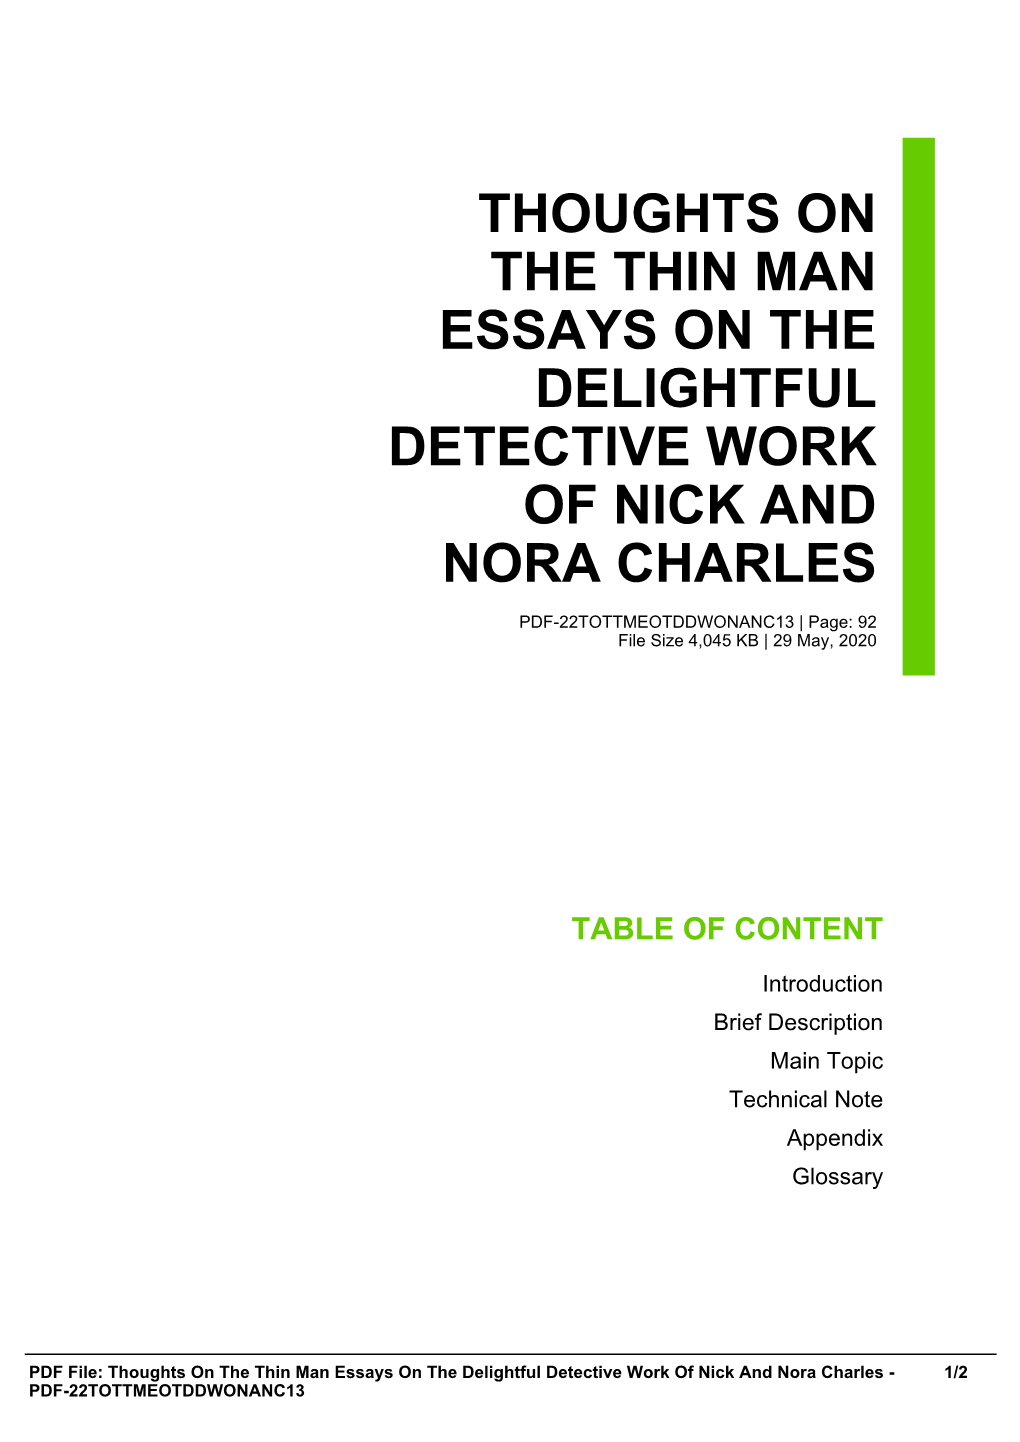 Thoughts on the Thin Man Essays on the Delightful Detective Work of Nick and Nora Charles